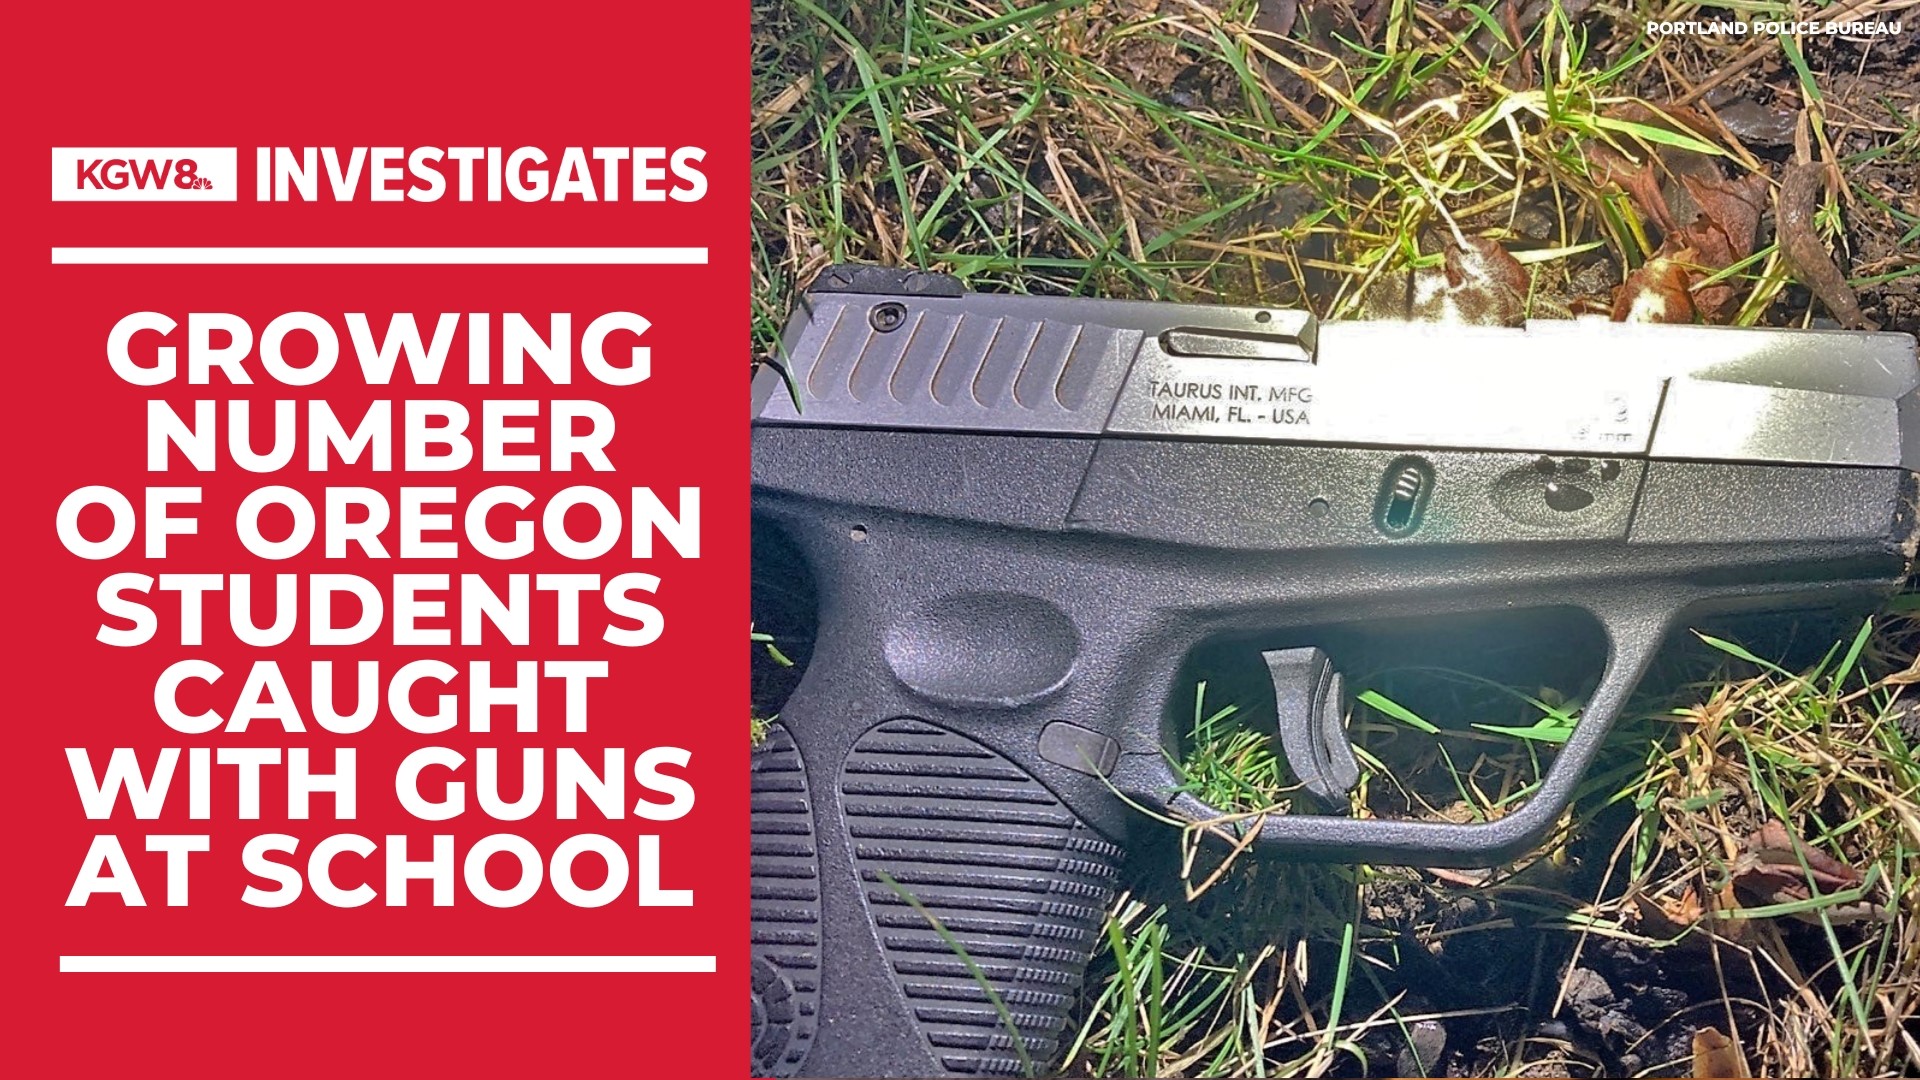 Last year, guns were found in 13 school districts in Oregon. Handguns, shotguns and rifles showed up in every type of community.